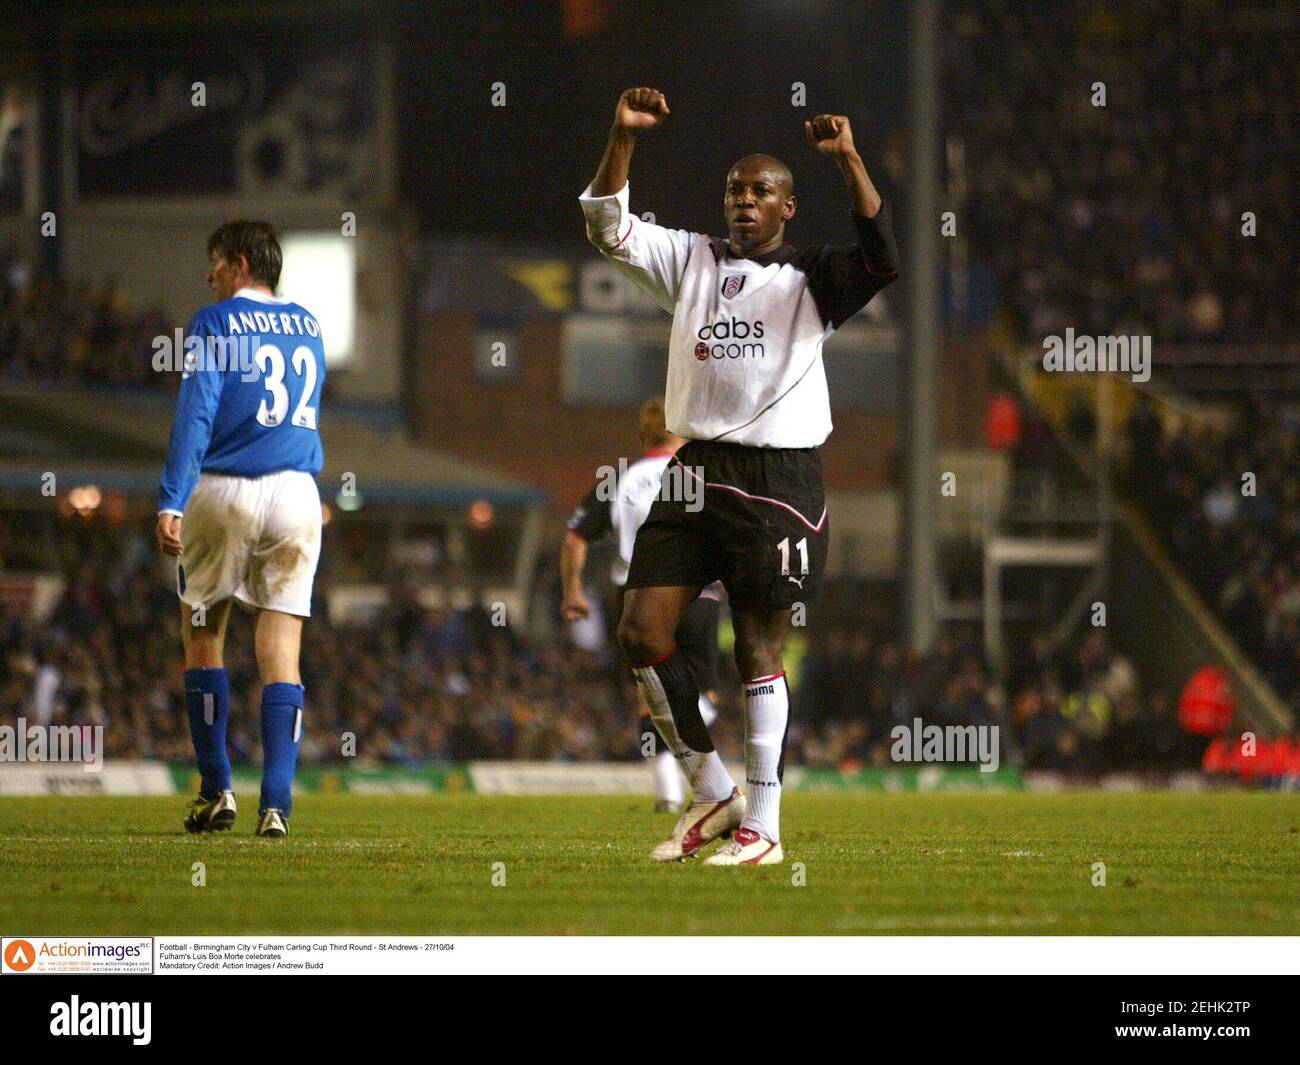 Football - Birmingham City v Fulham Carling Cup Third Round - St Andrews - 27/10/04  Fulham's Luis Boa Morte celebrates  Mandatory Credit: Action Images / Andrew Budd  04/05 Stock Photo